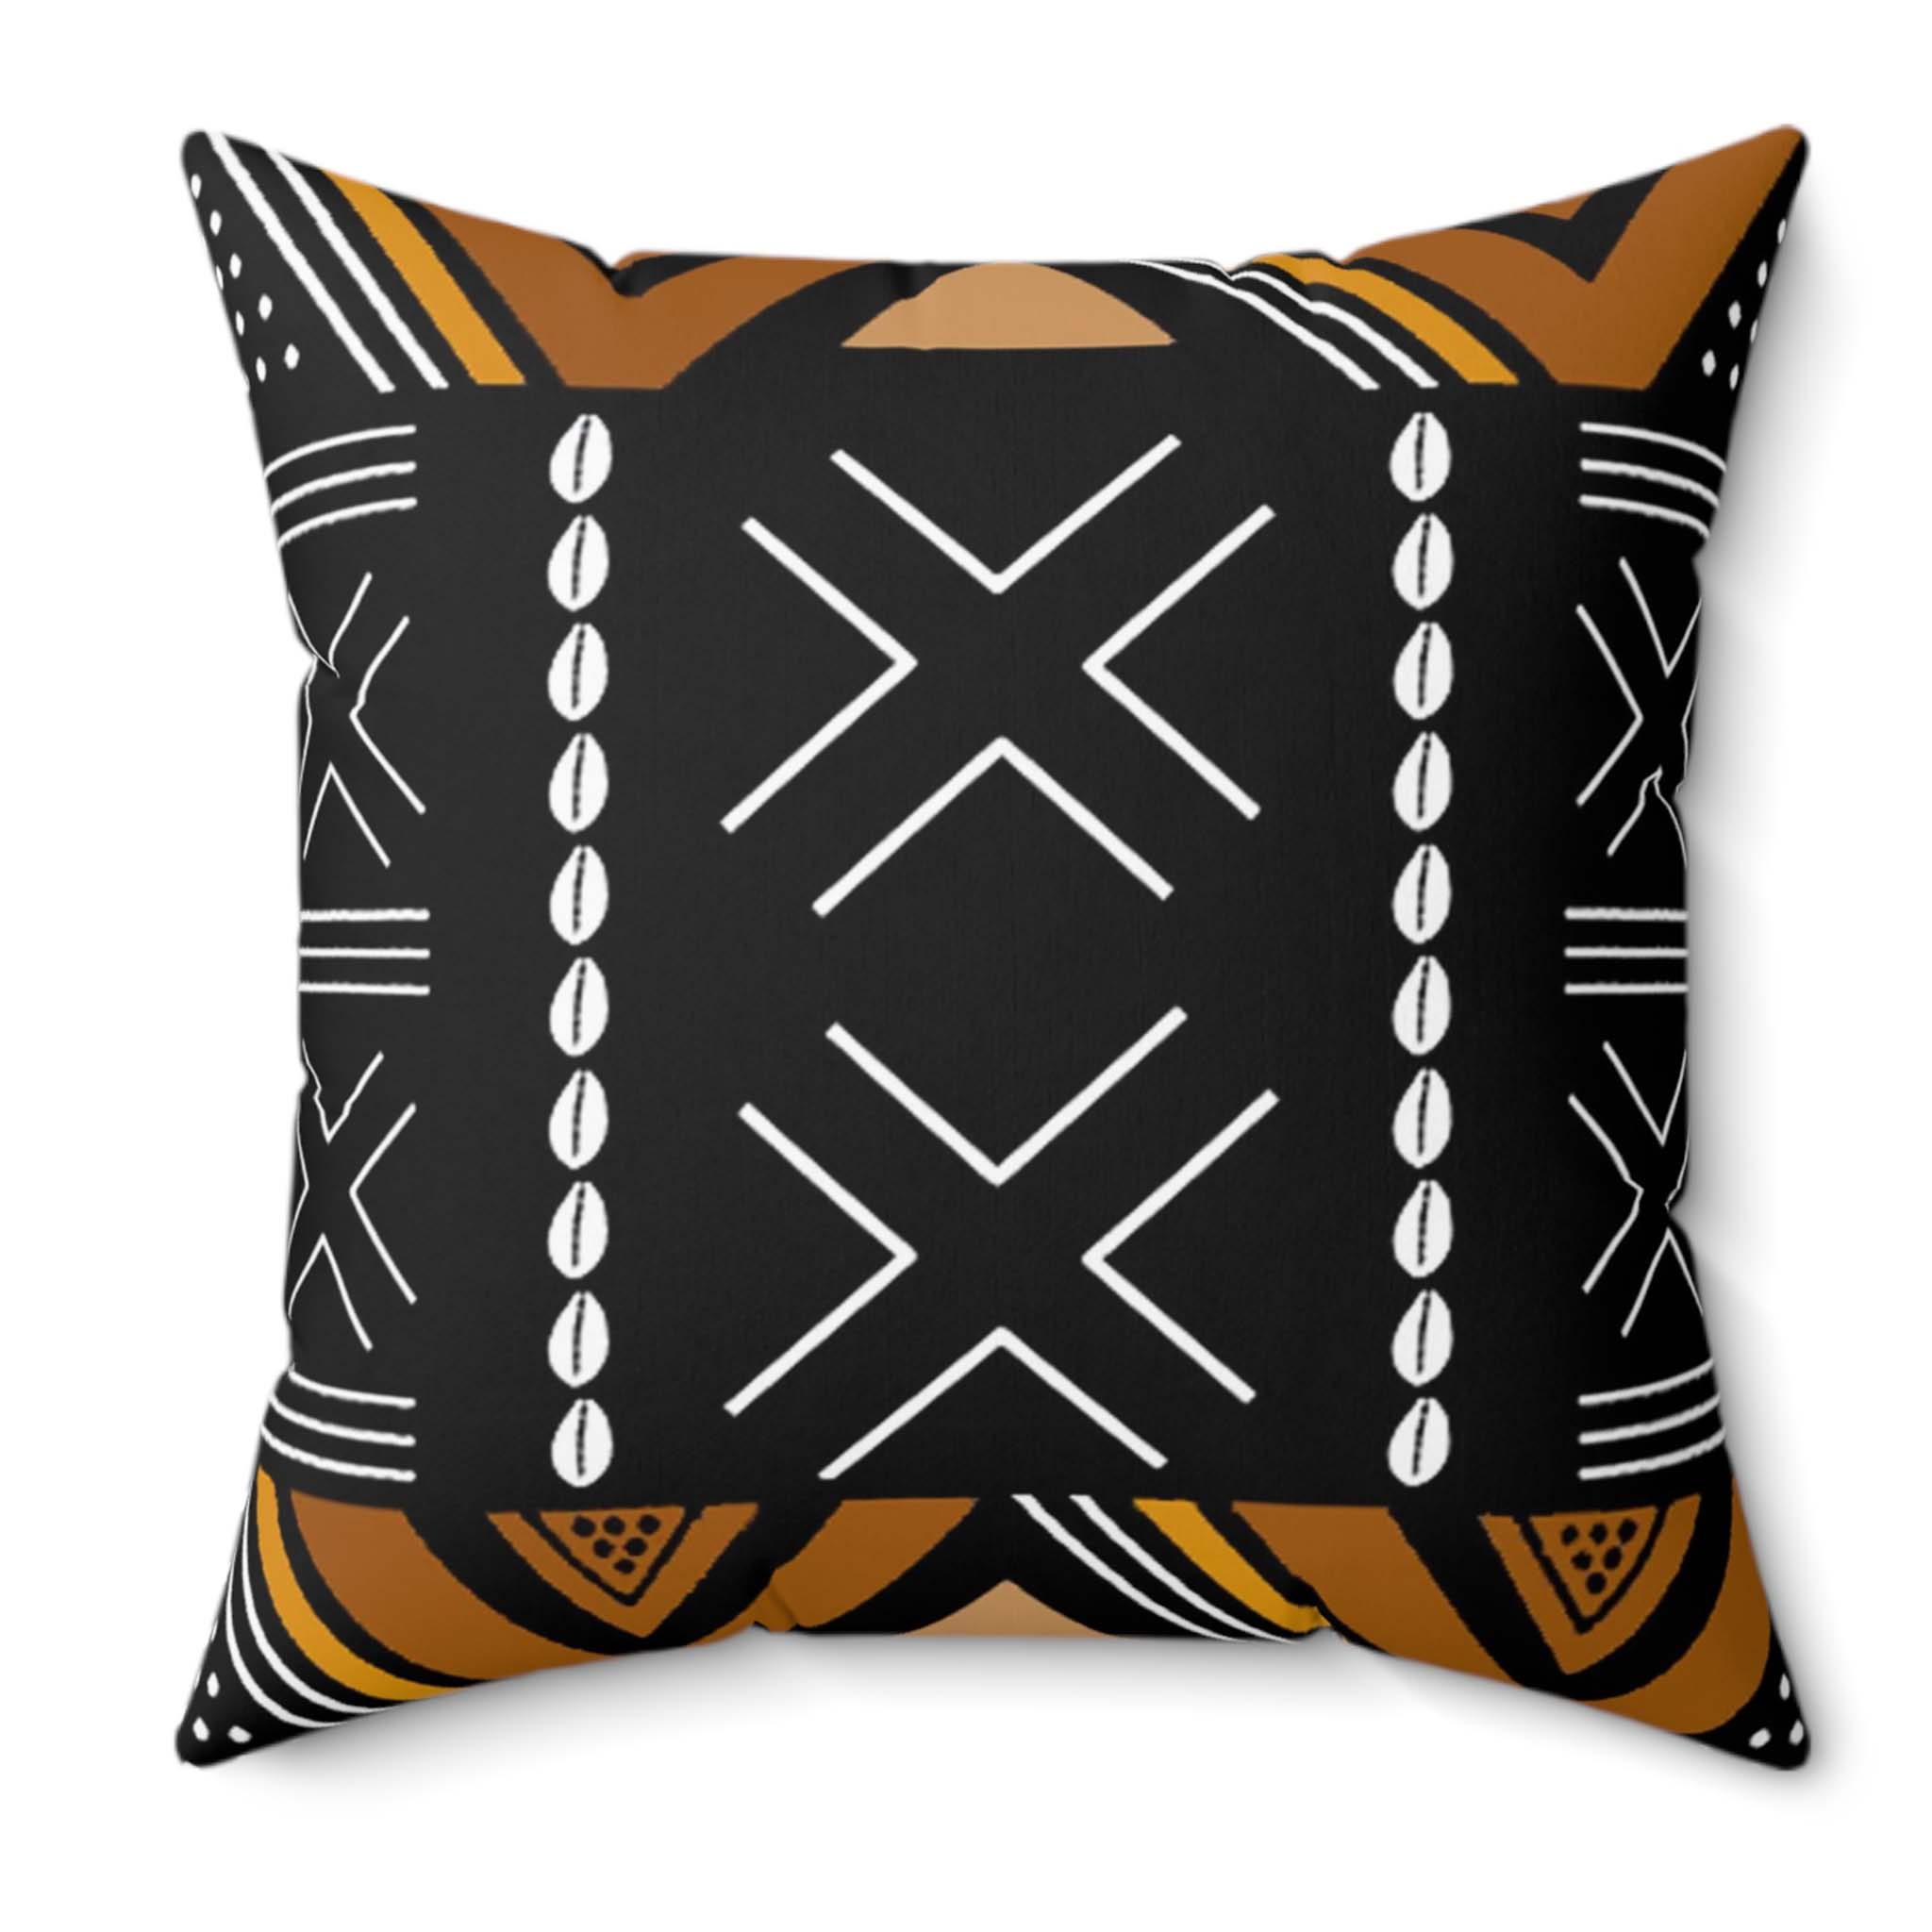 Mudcloth Pillow Case in African Tribal Cushion Cover Sets